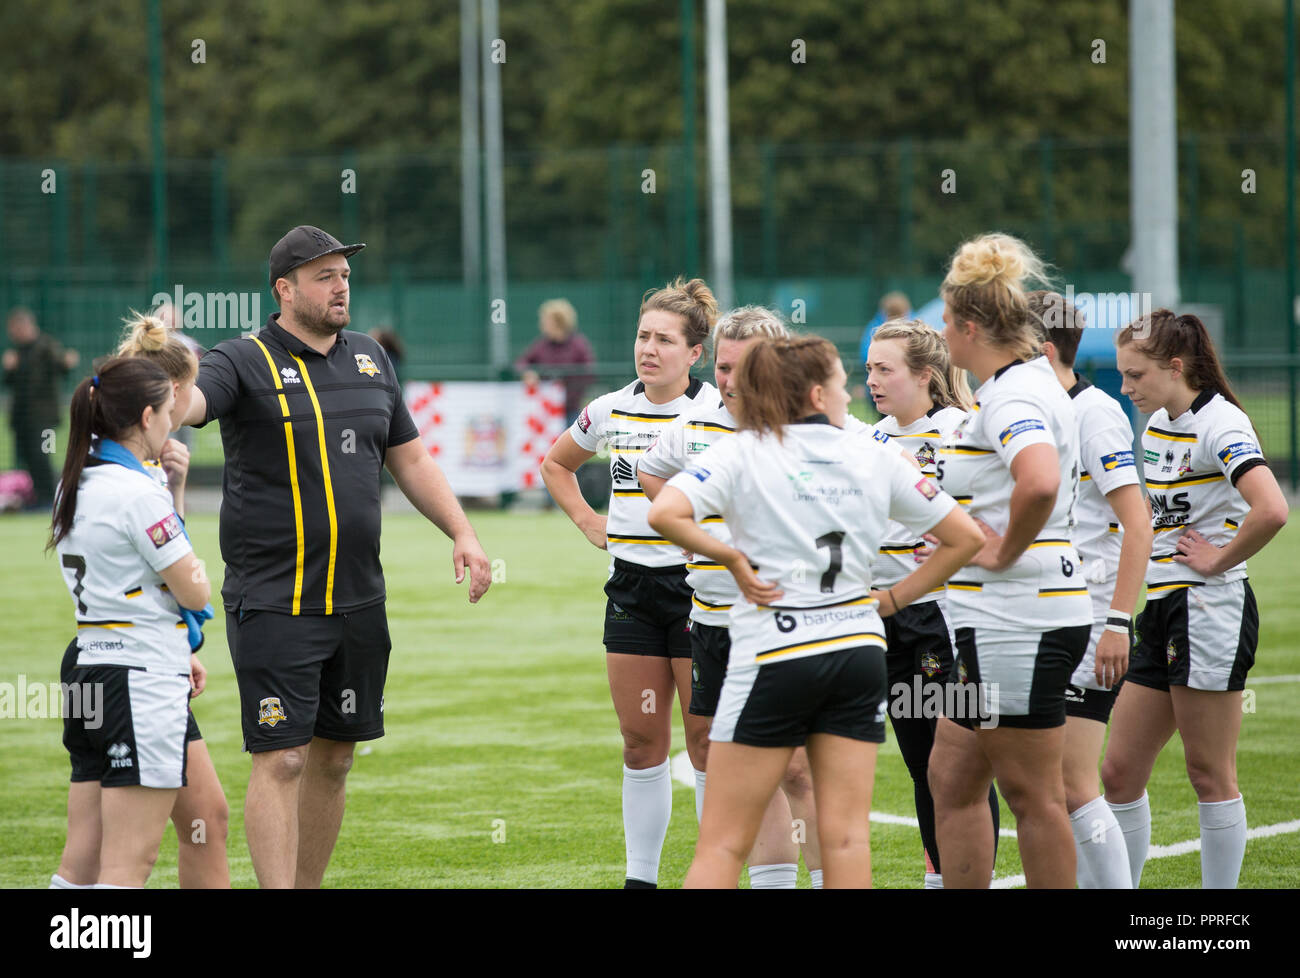 A group of female rugby’s players listening to their coach talk team tactics during a half time break at a rugby match. Stock Photo